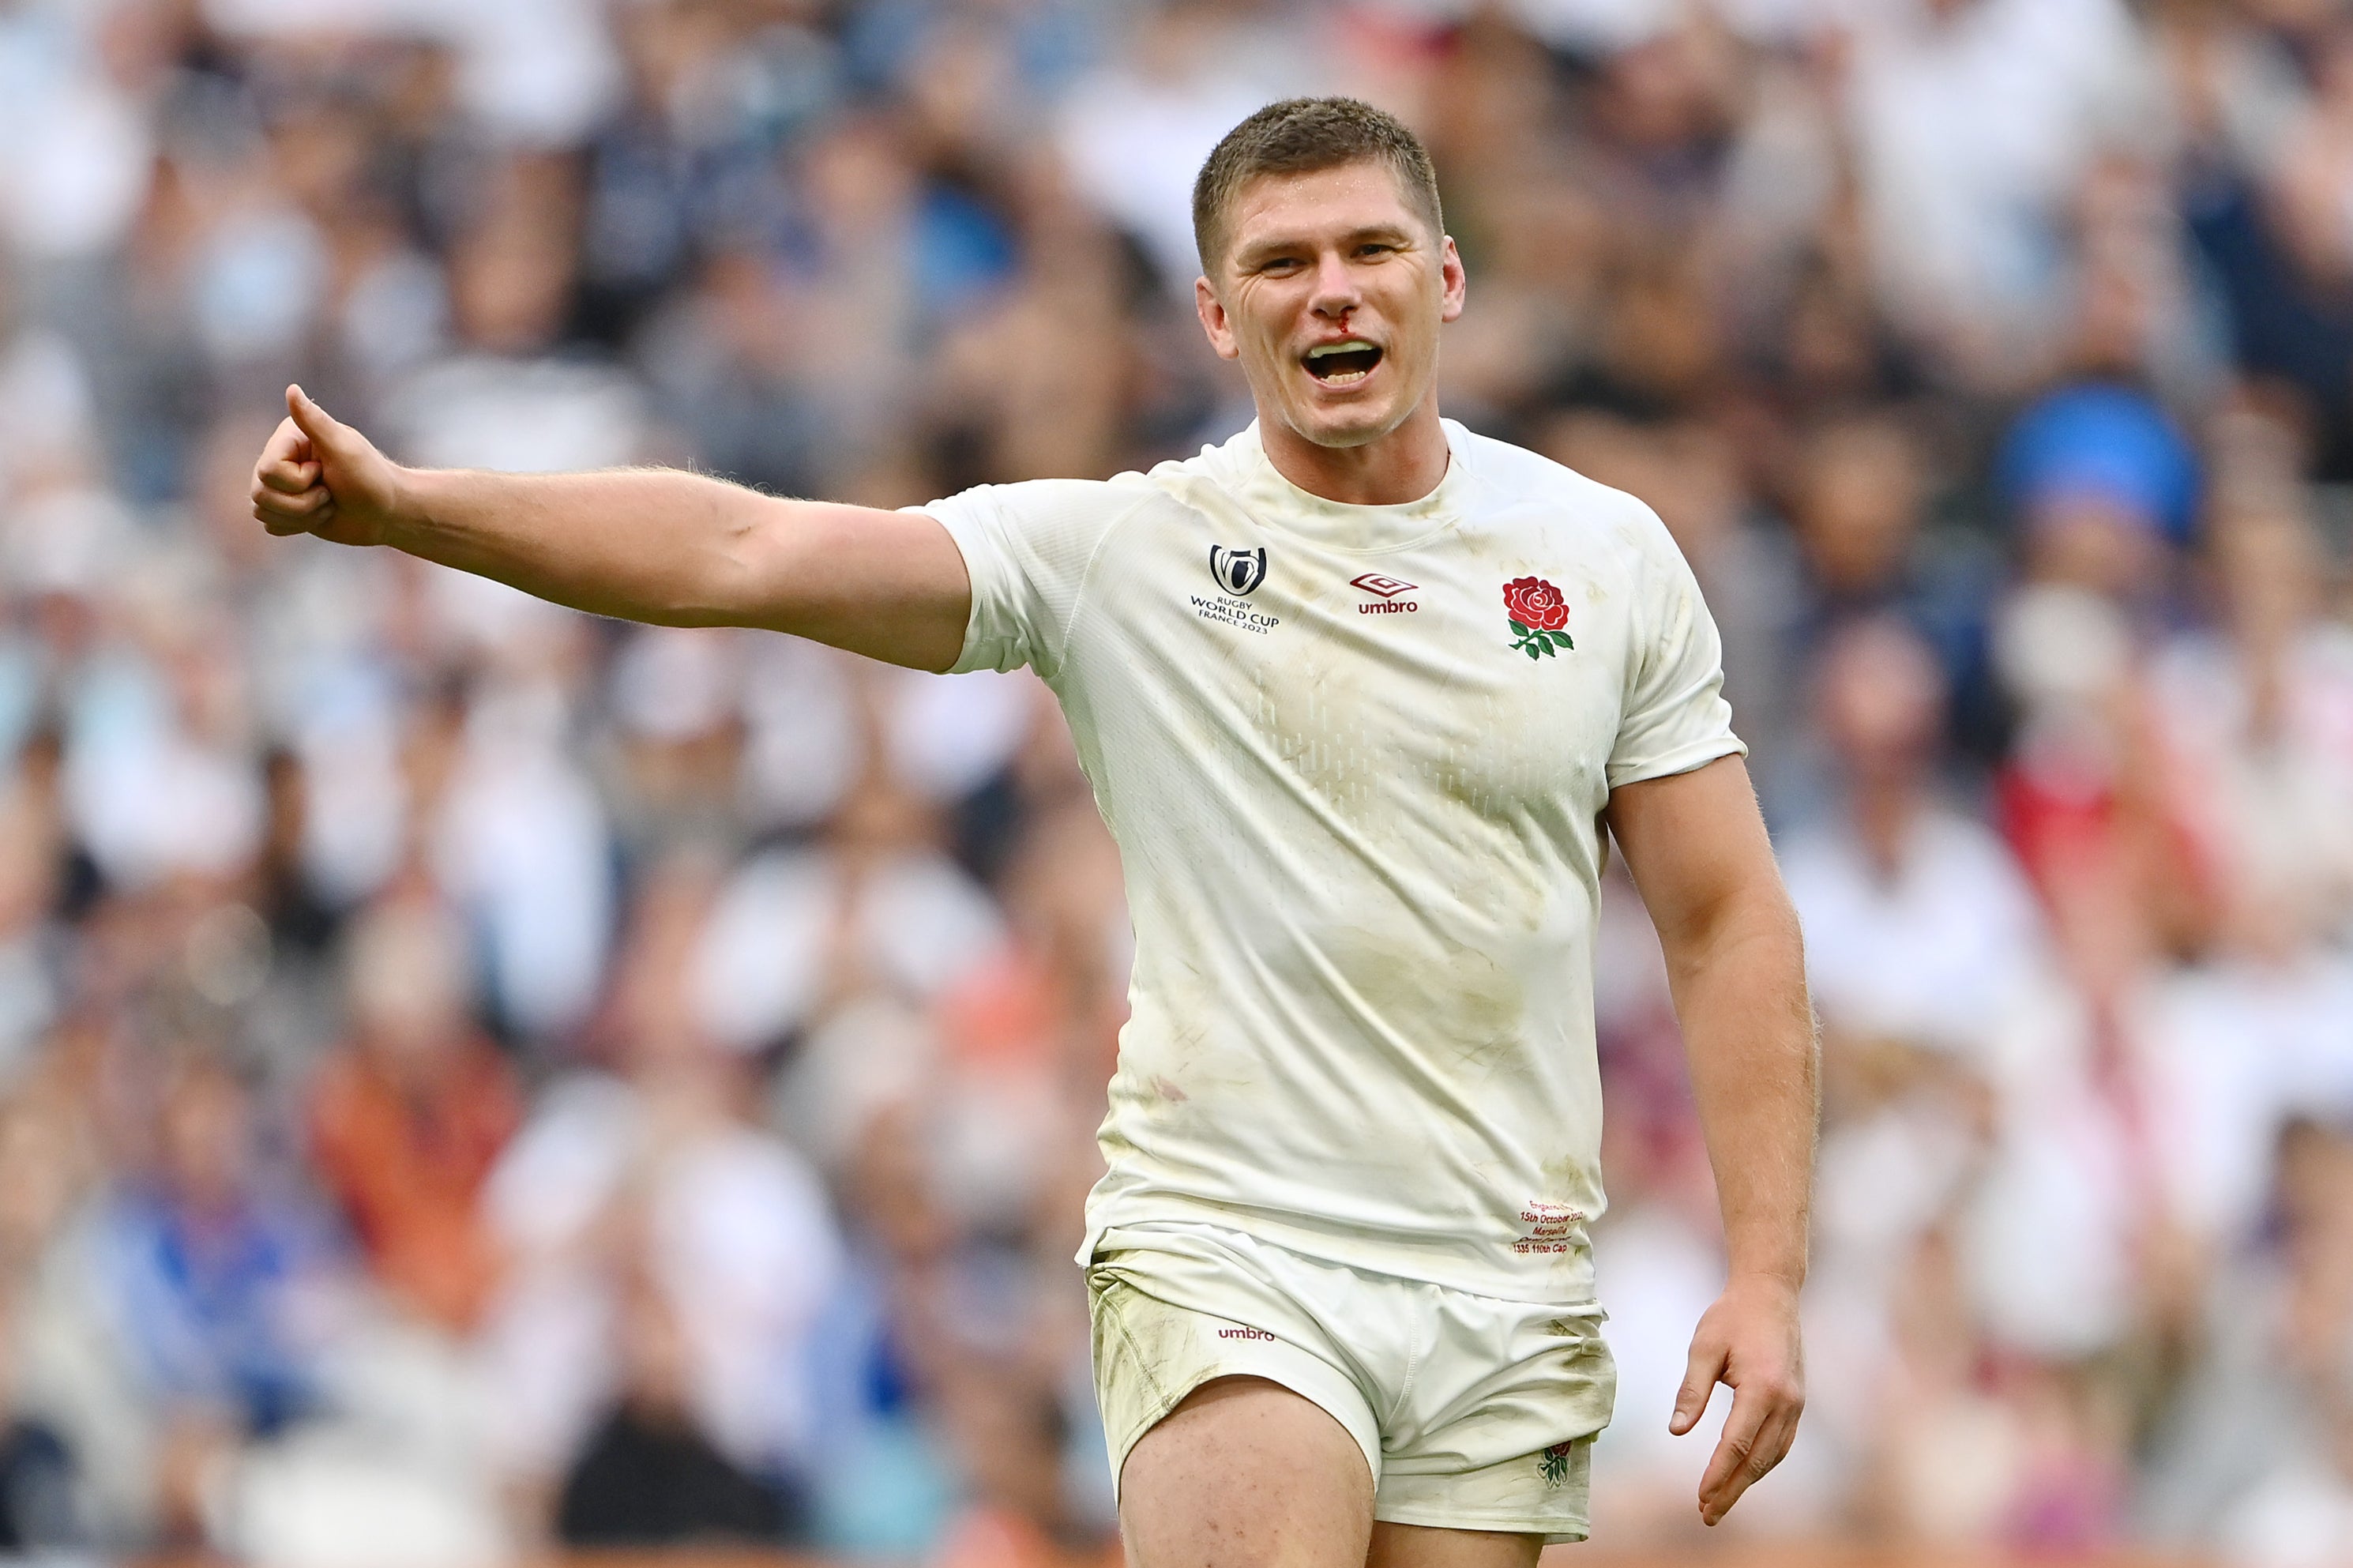 Owen Farrell has been representing England on the international stage for more than 10 years